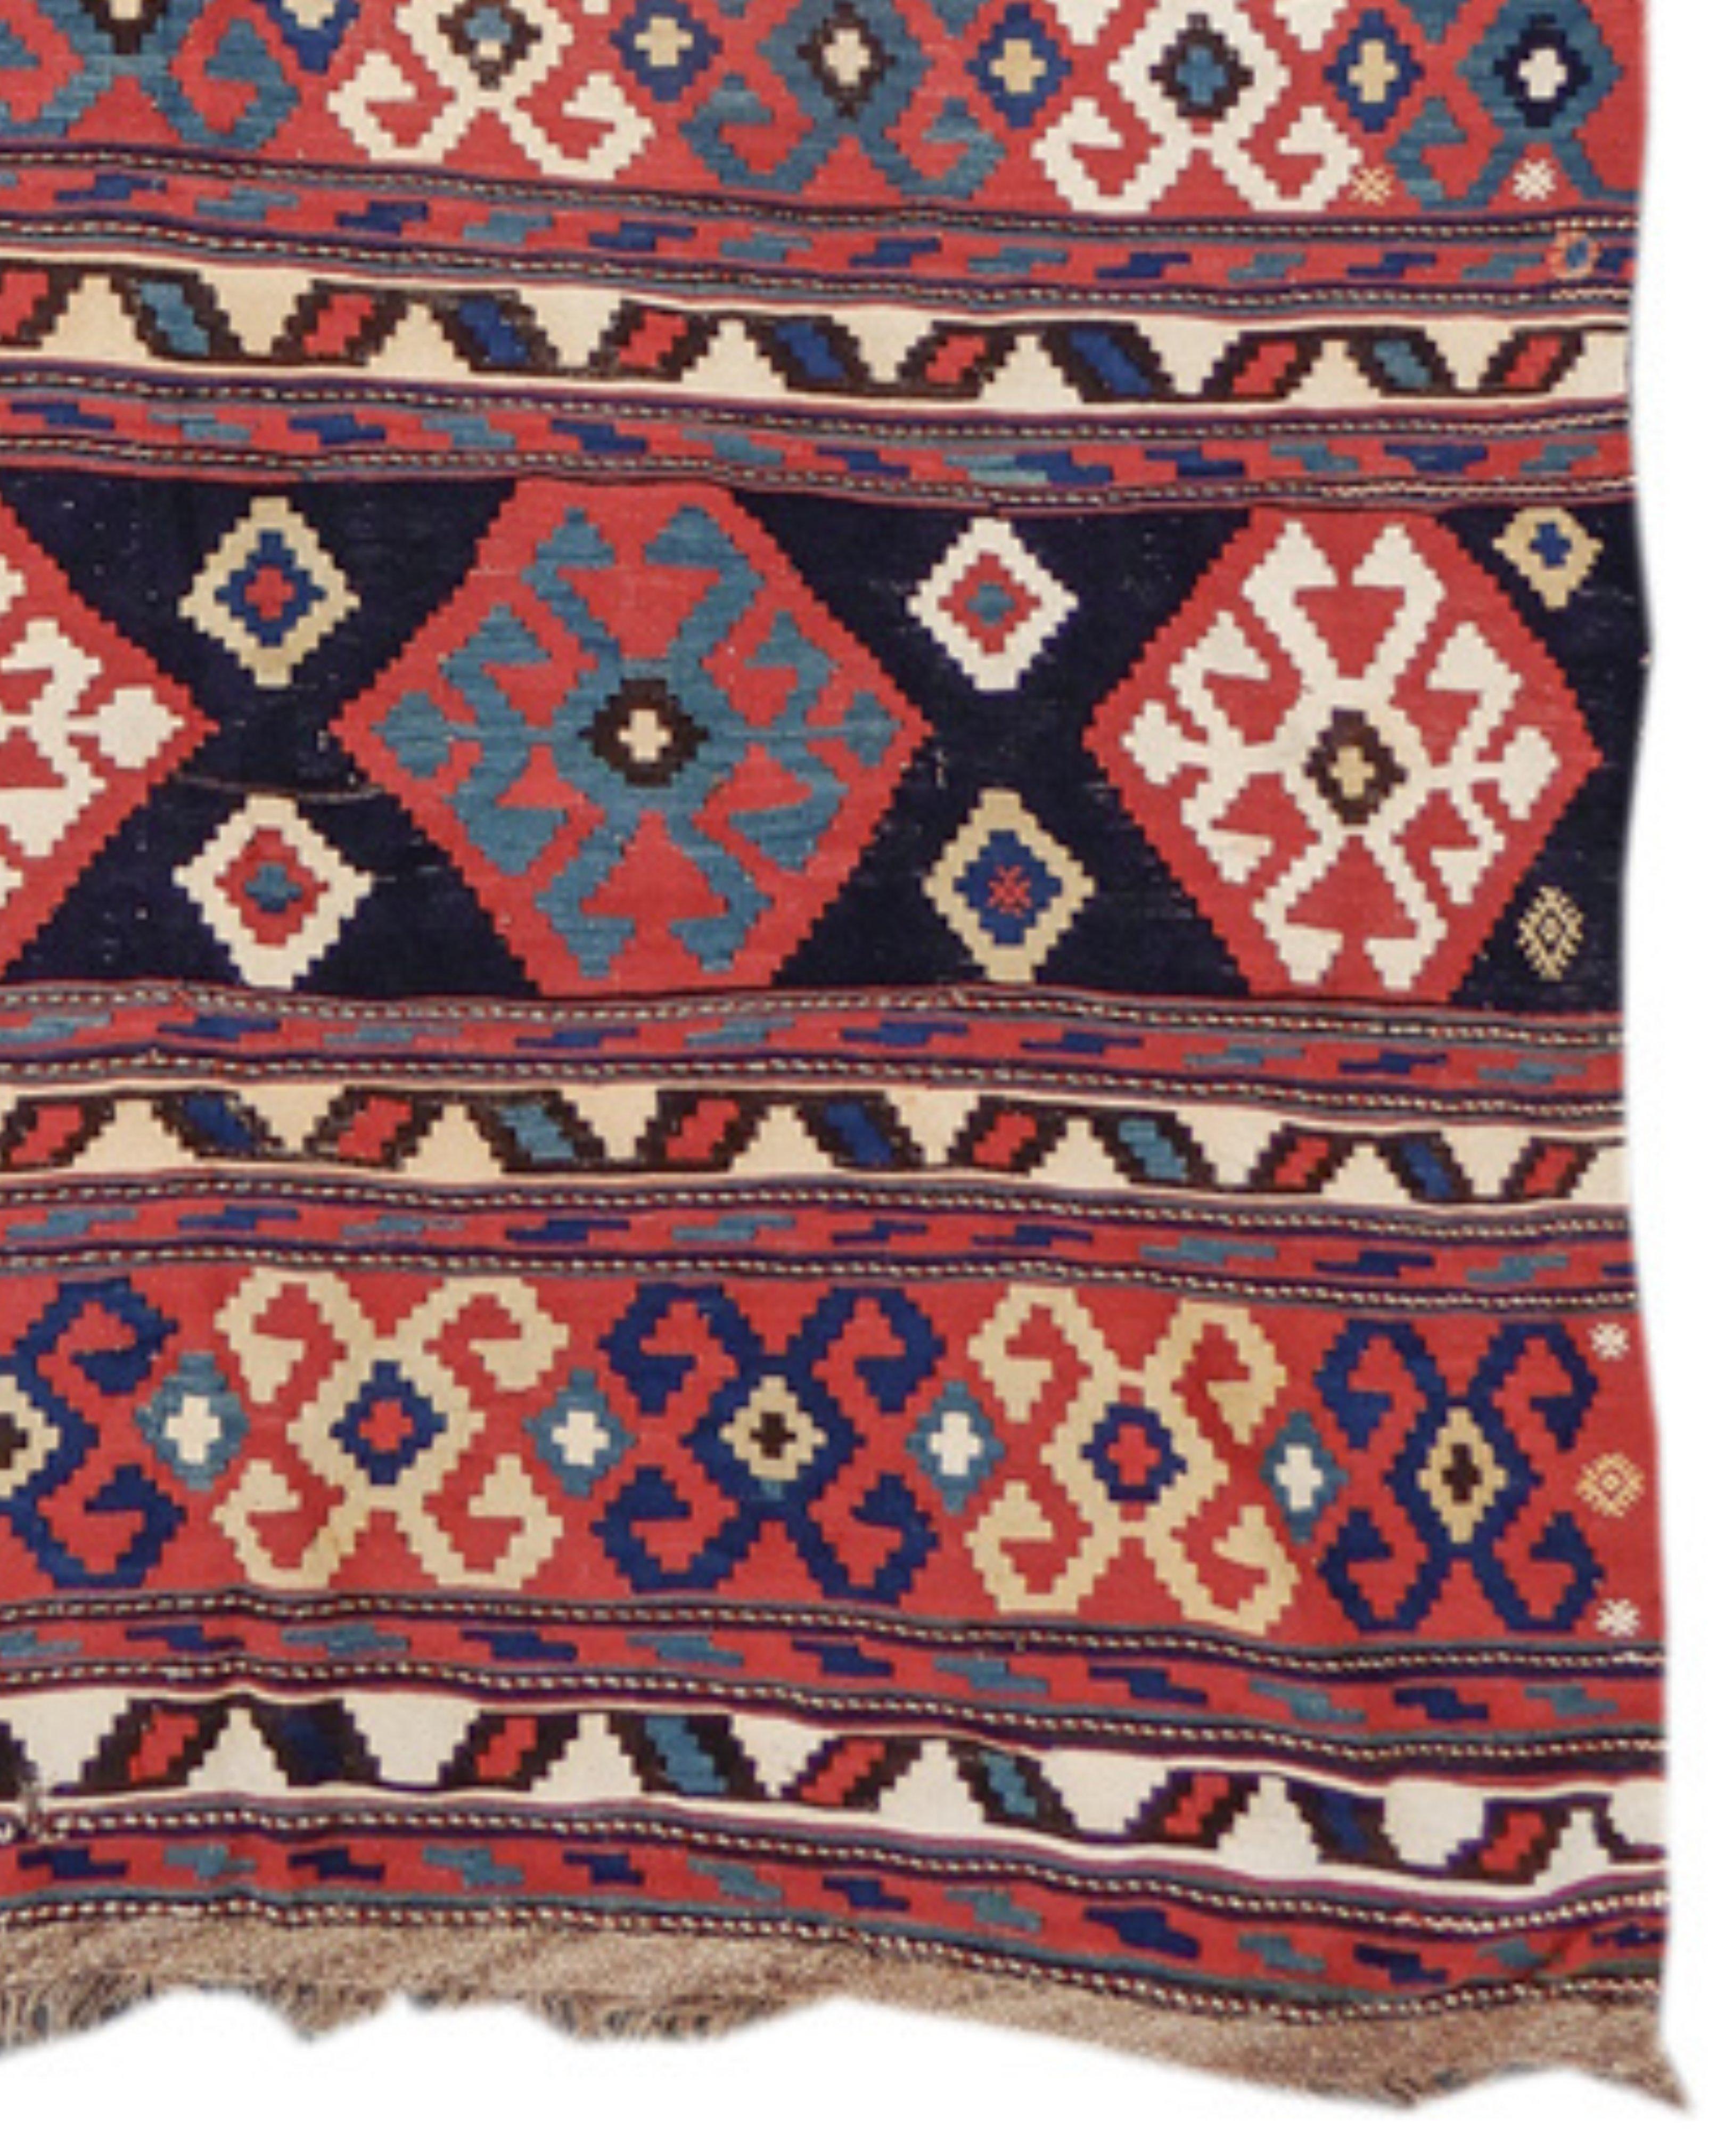 Shahsevan Kilim Rug, Late 19th Century In Excellent Condition For Sale In San Francisco, CA